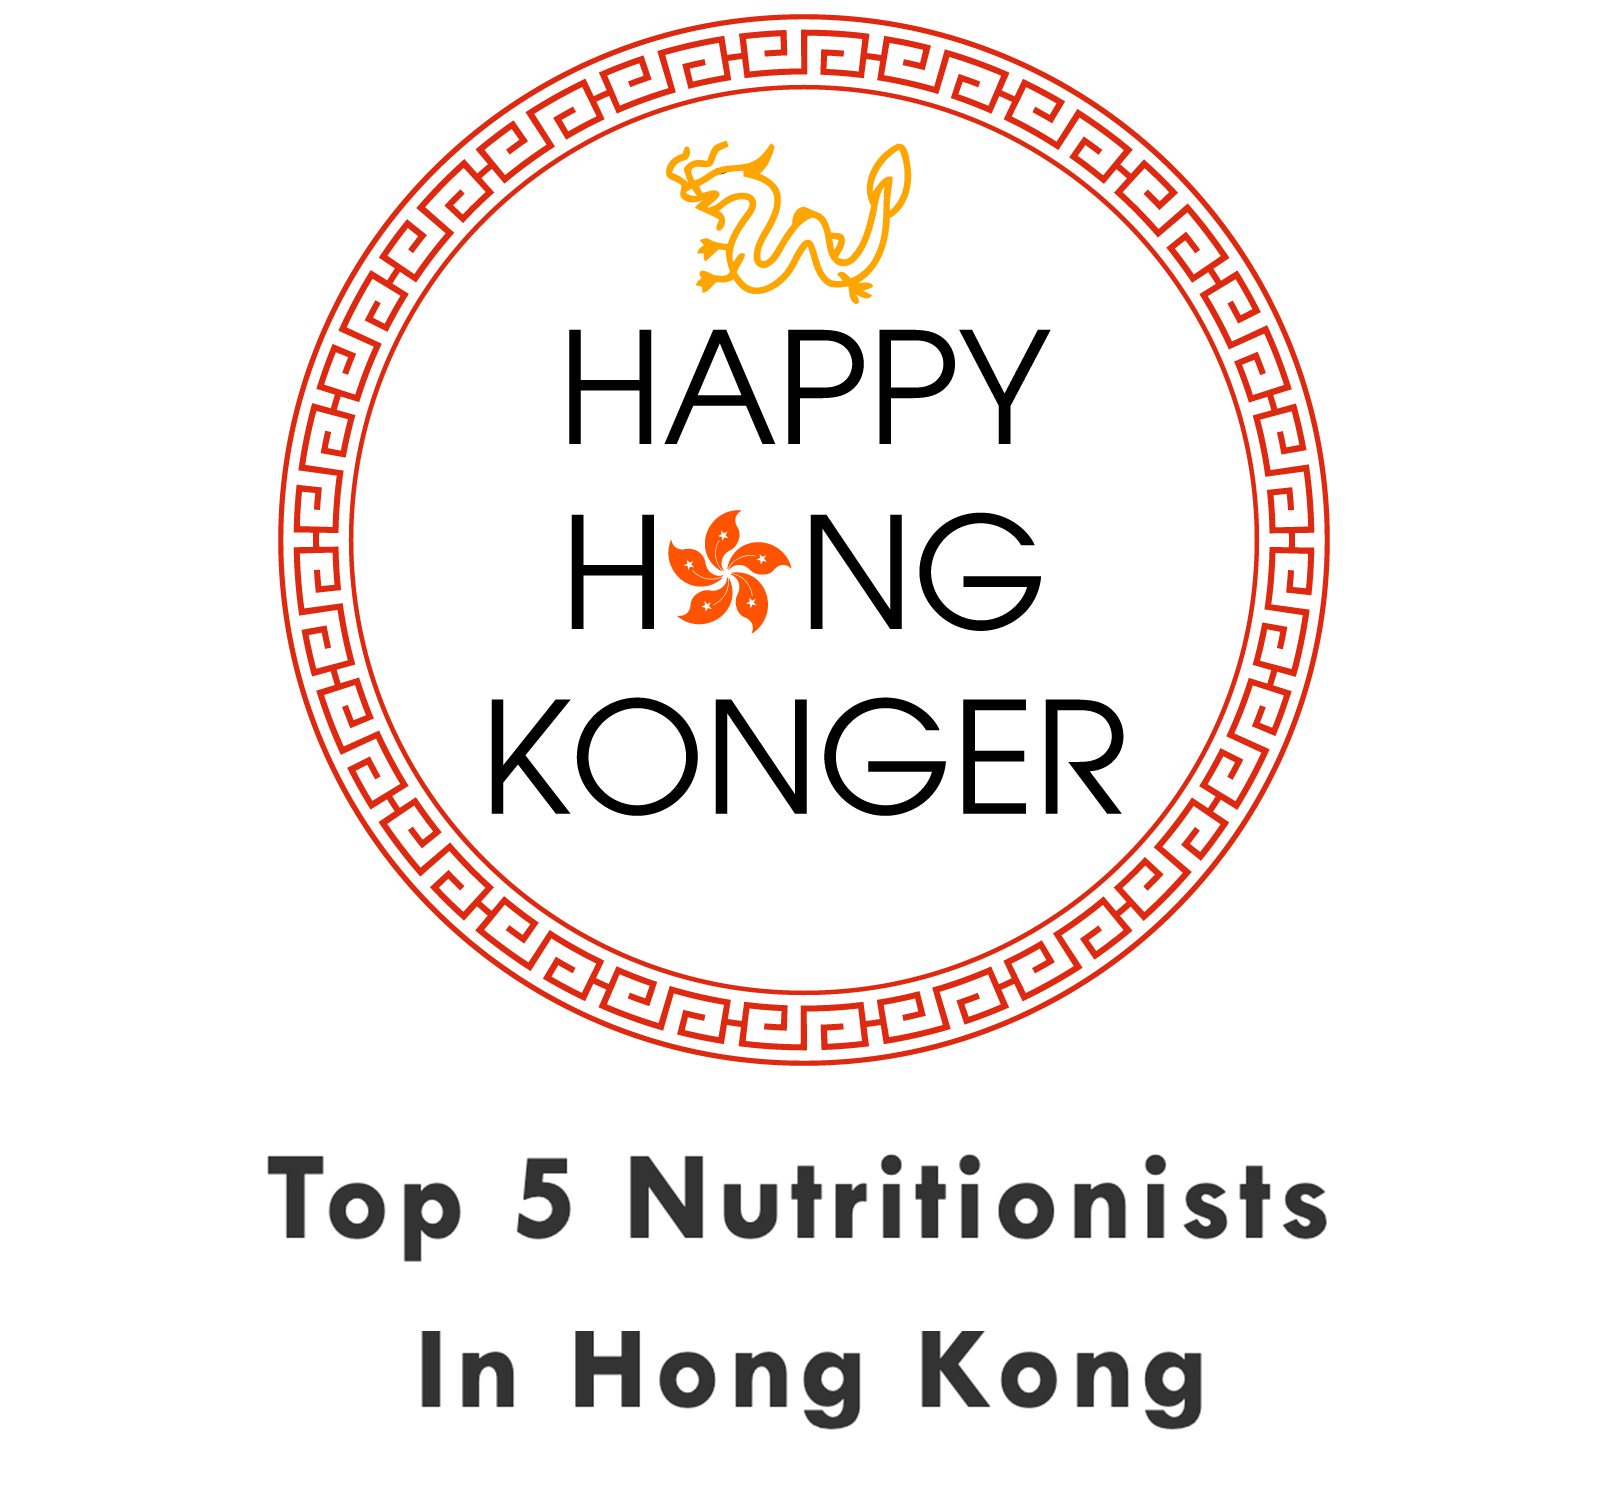 Happy Hong Konger Top nutritionist Central and Stanley Wellness